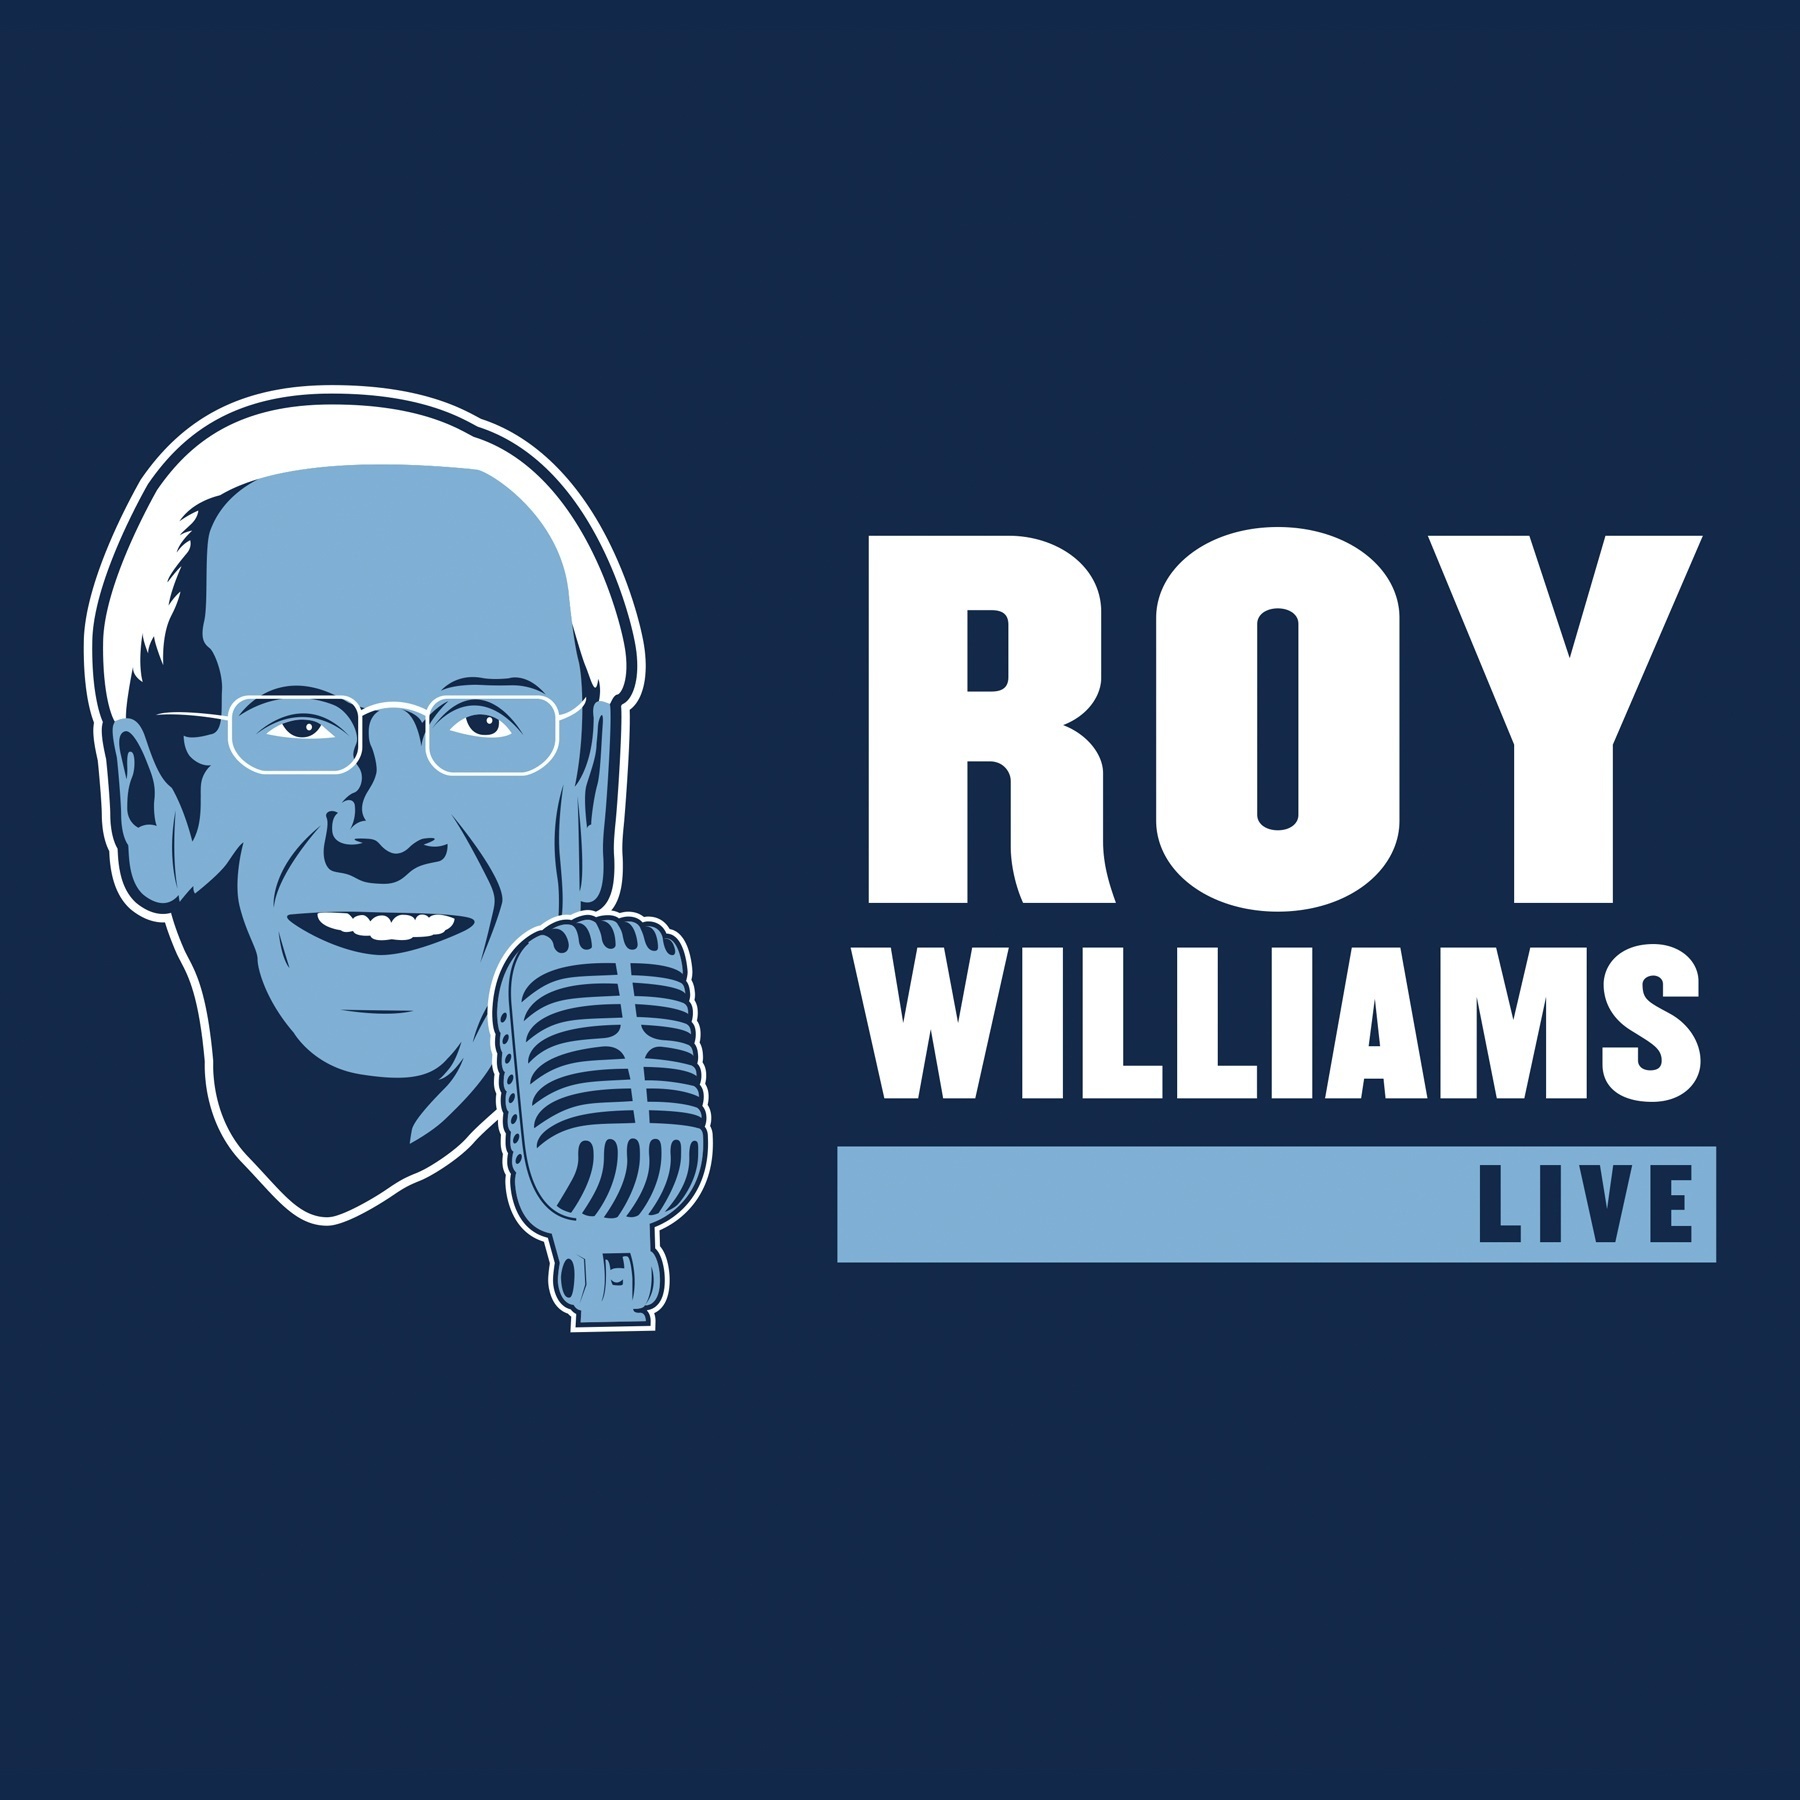 Roy Williams Live from 2-19-18